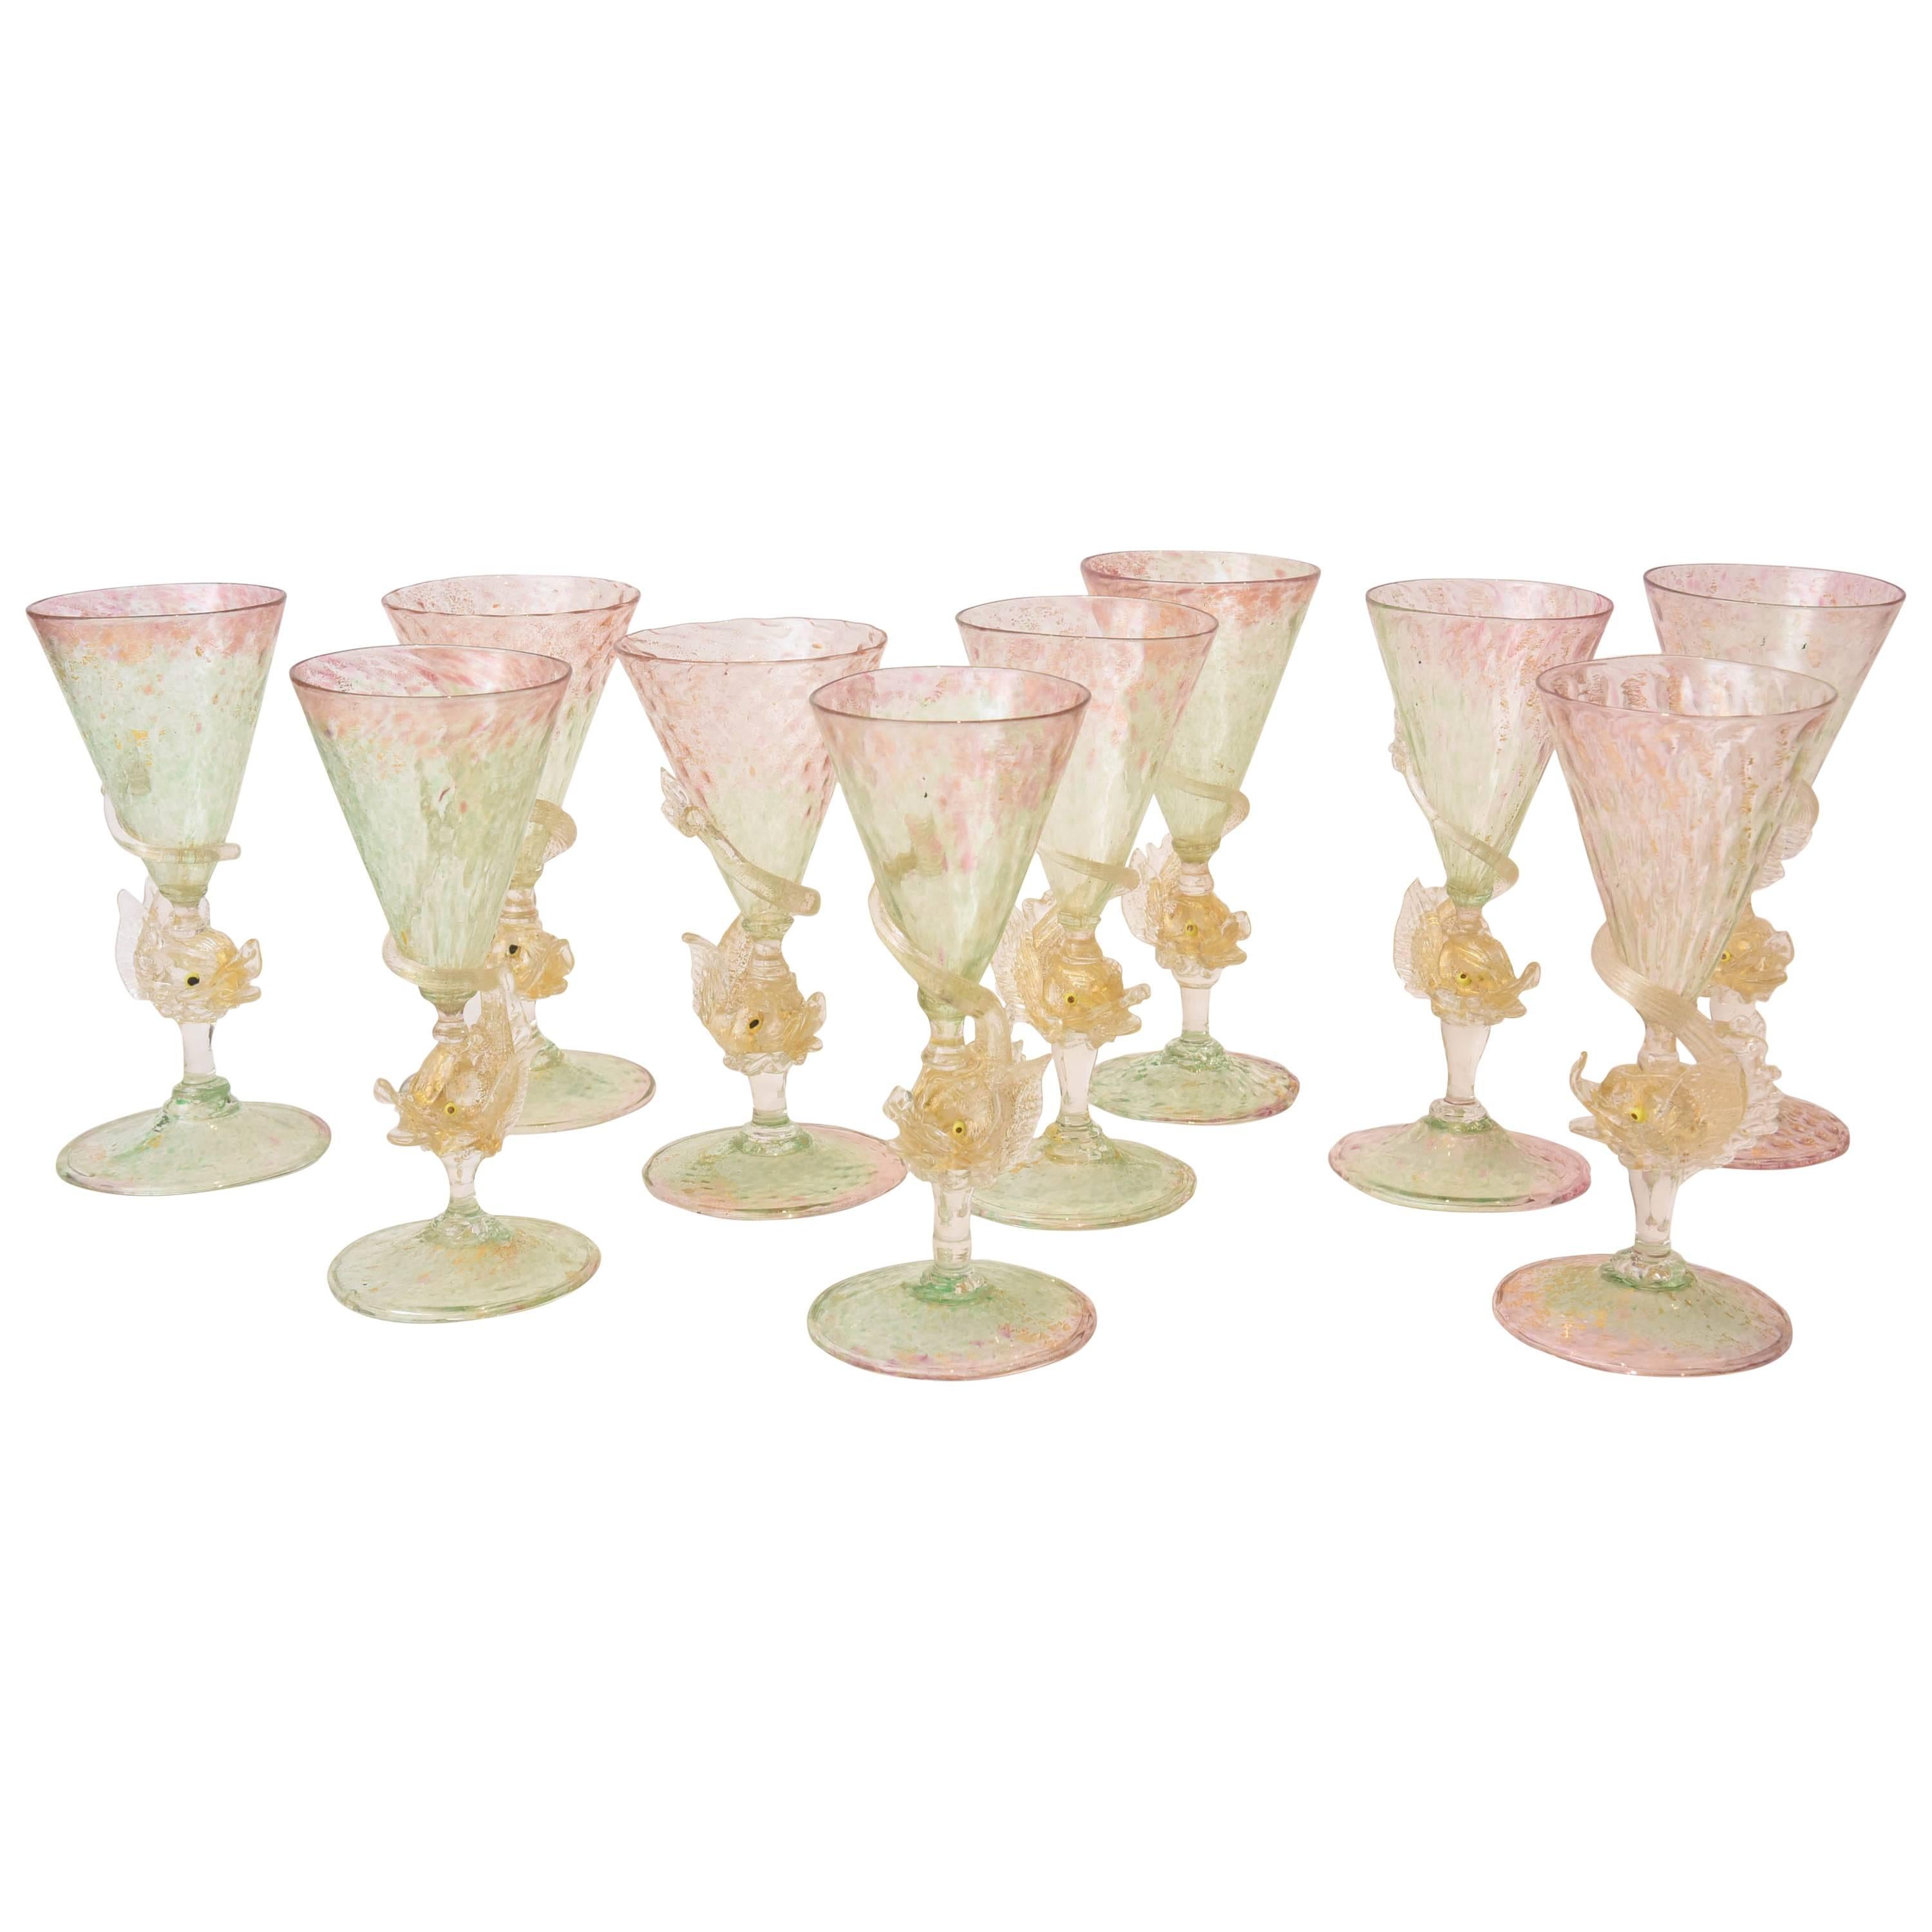 Antique Venetian Goblets, Pink-Green with Dolphin Figural Stems. Sold Individual